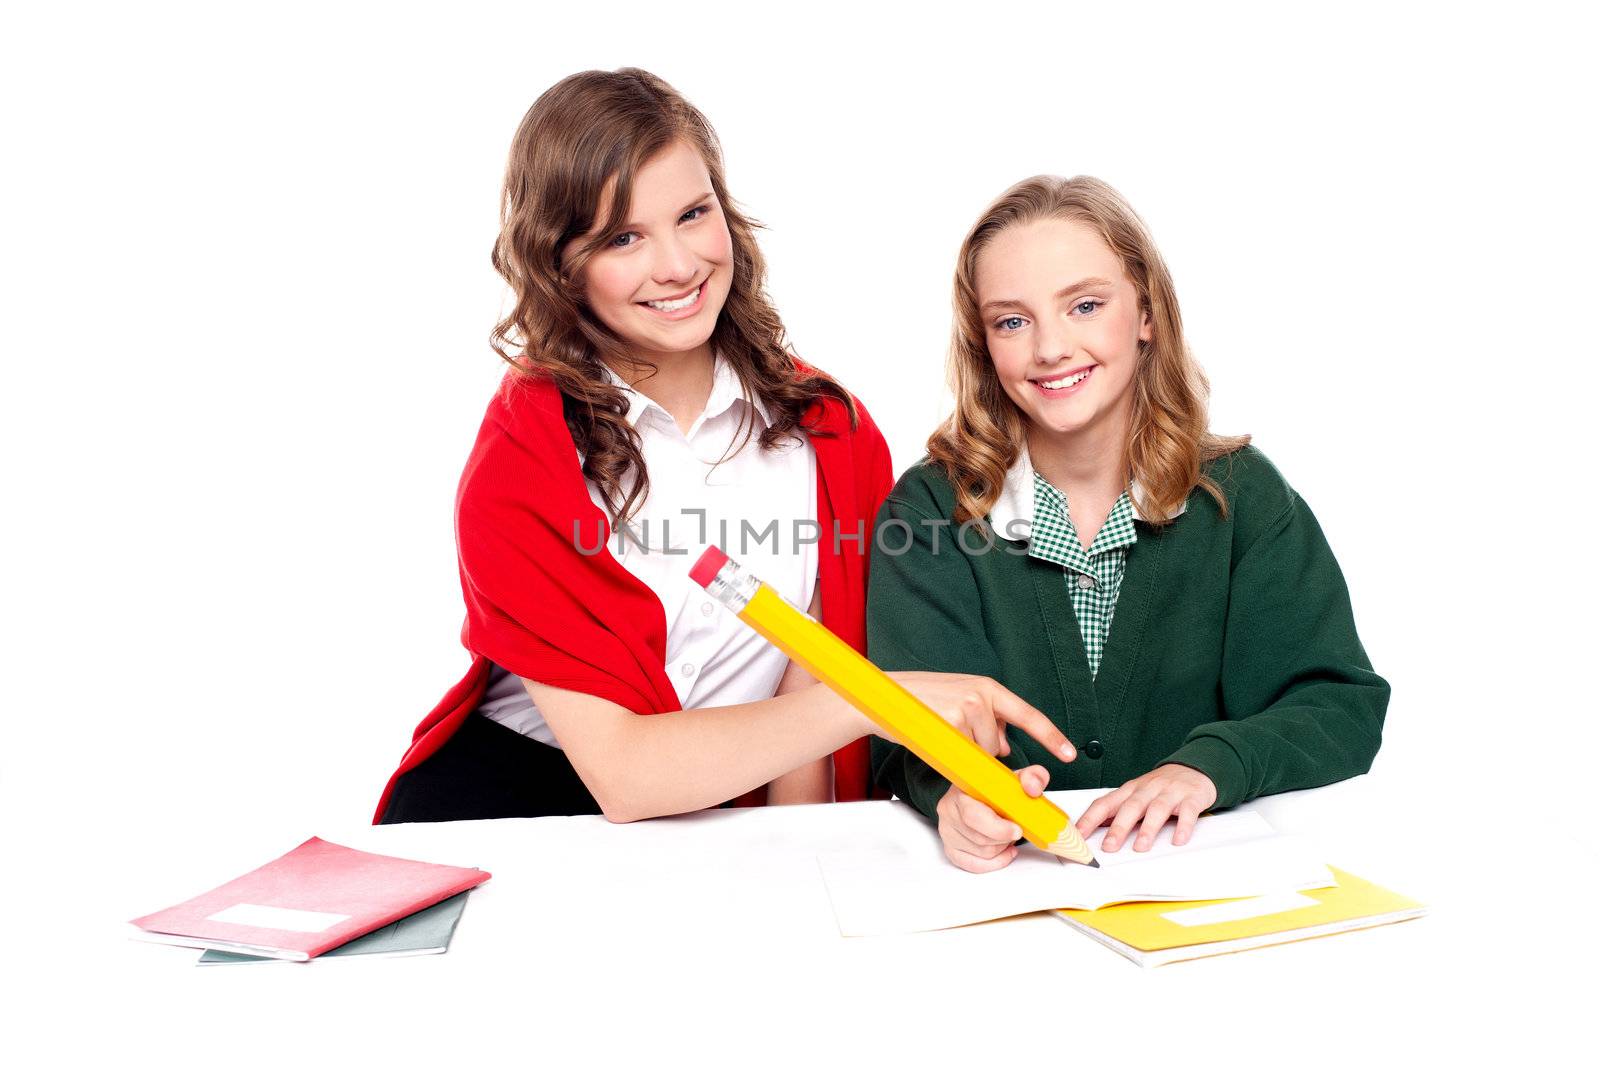 Teenagers studying together and having fun. All on white background